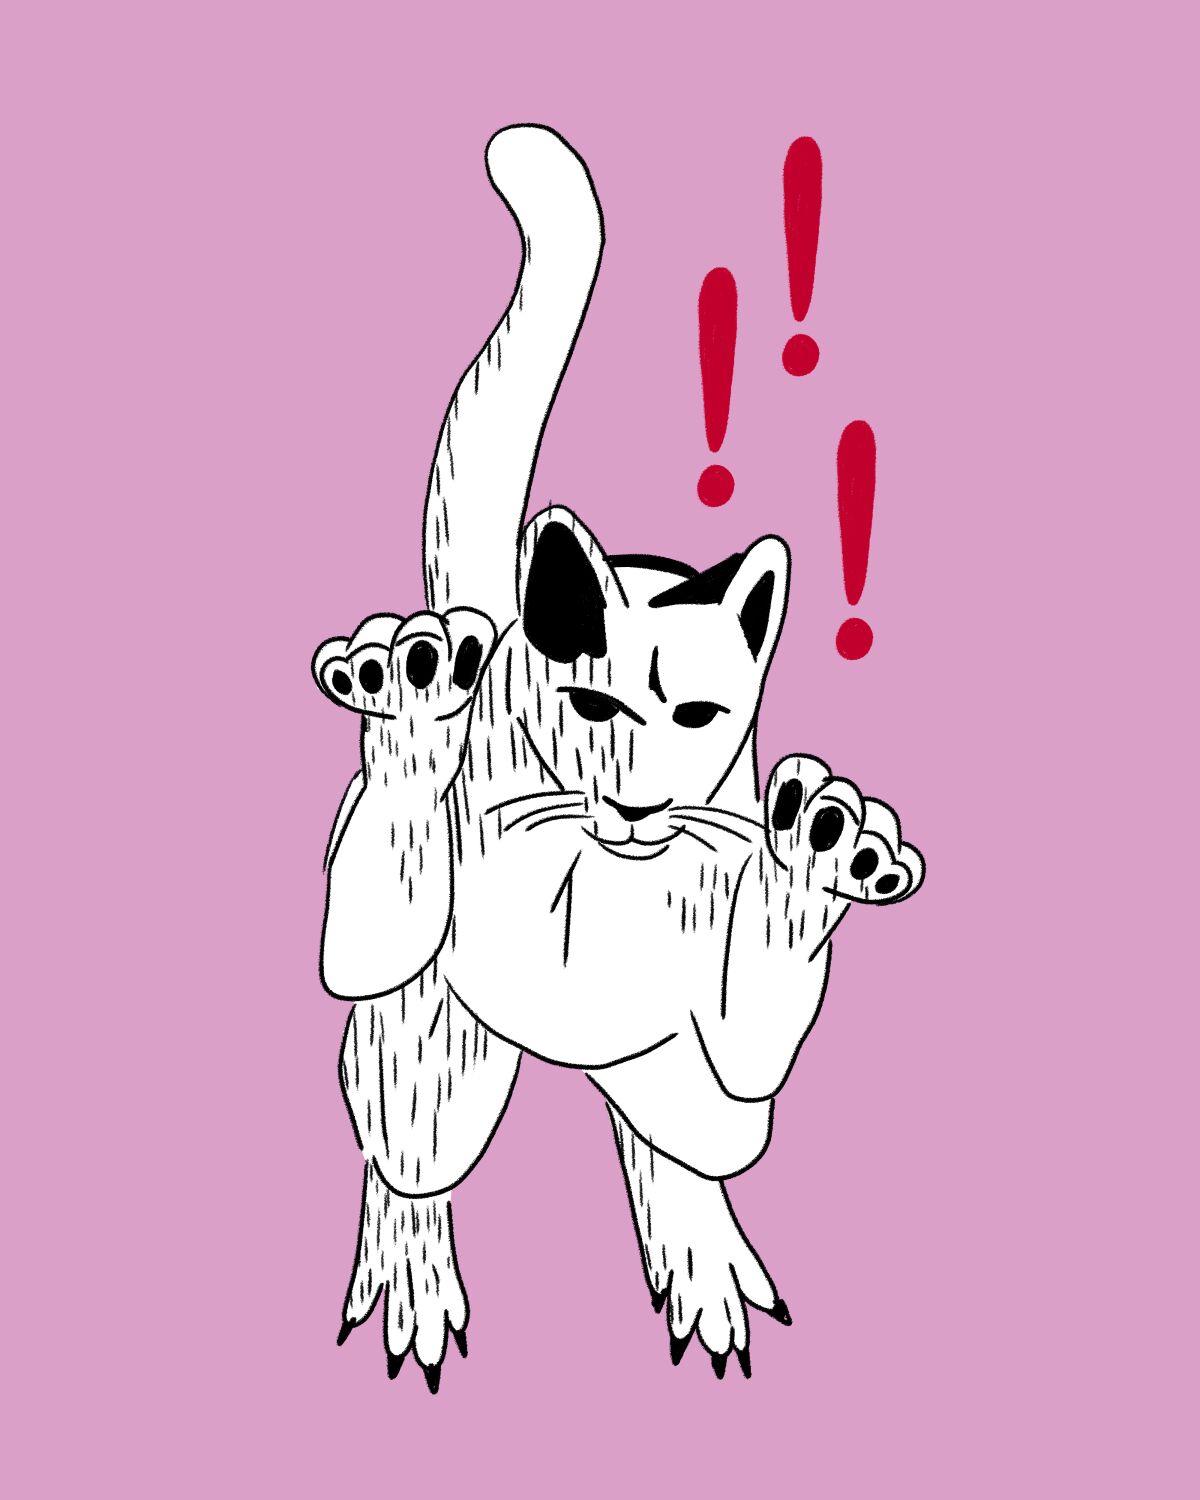 Illustration of a pouncing cat.